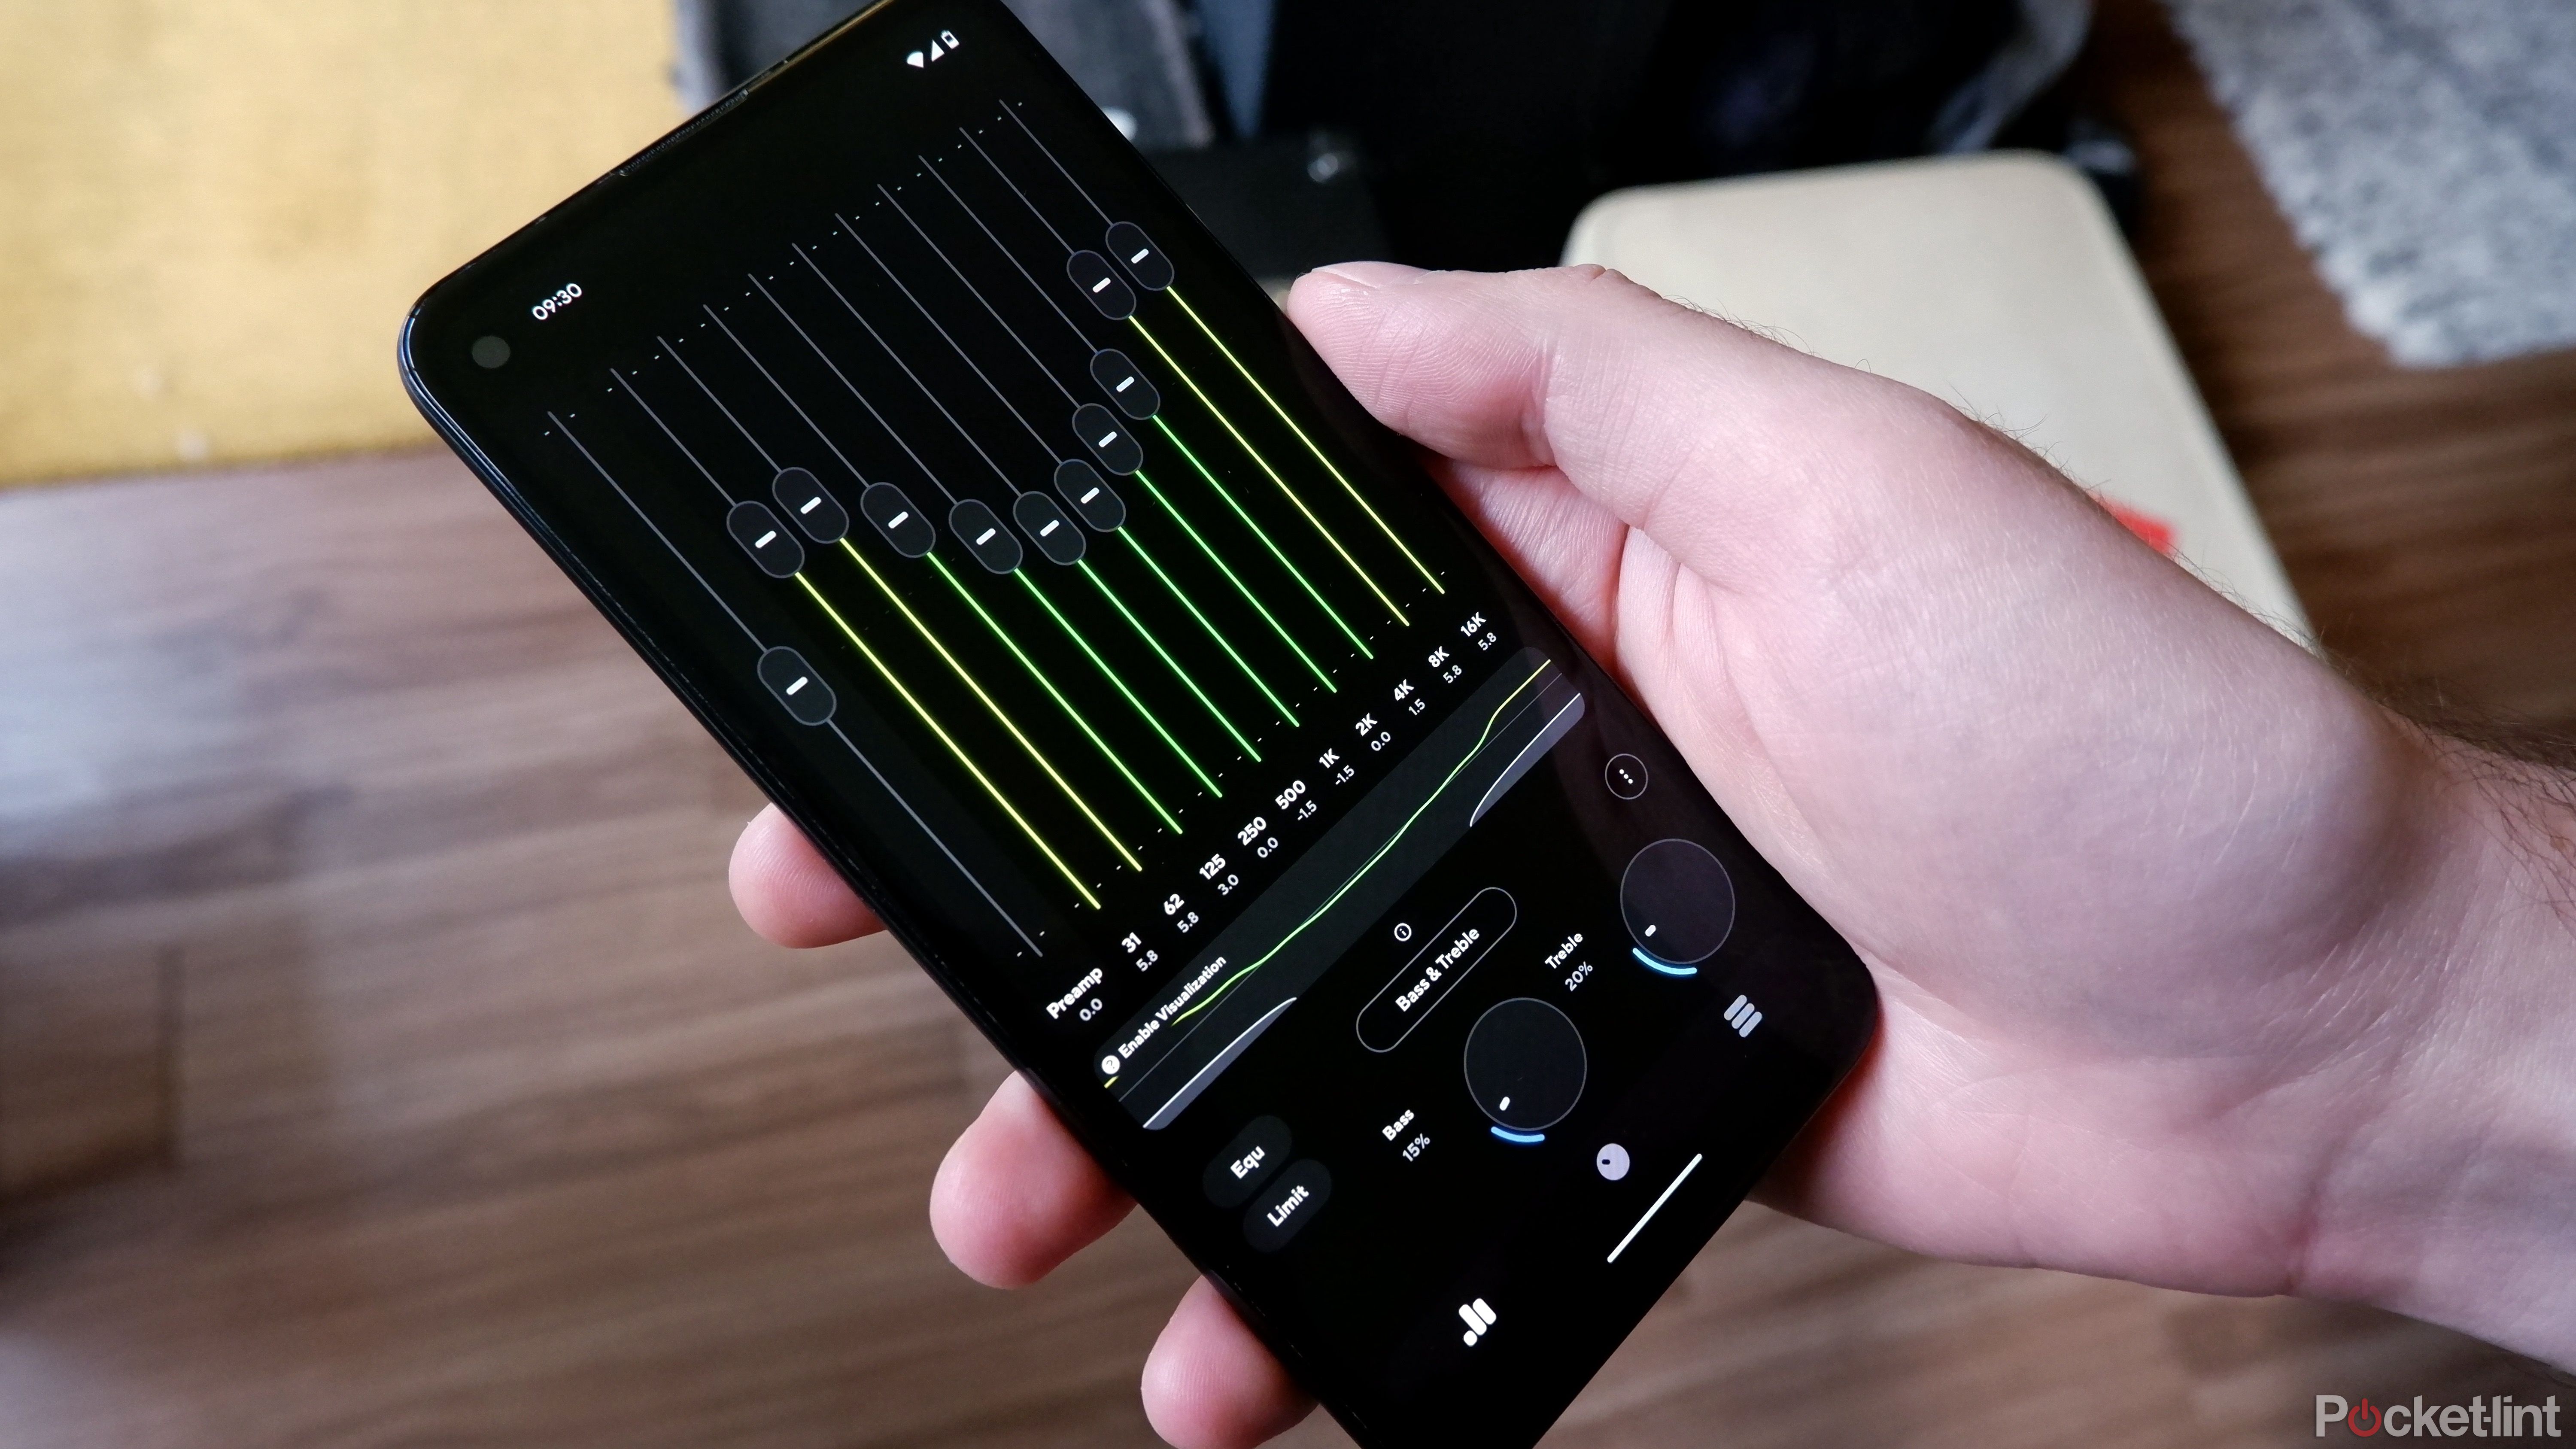 A Google Pixel being held by a hand with the Poweramp Equalizer app open.